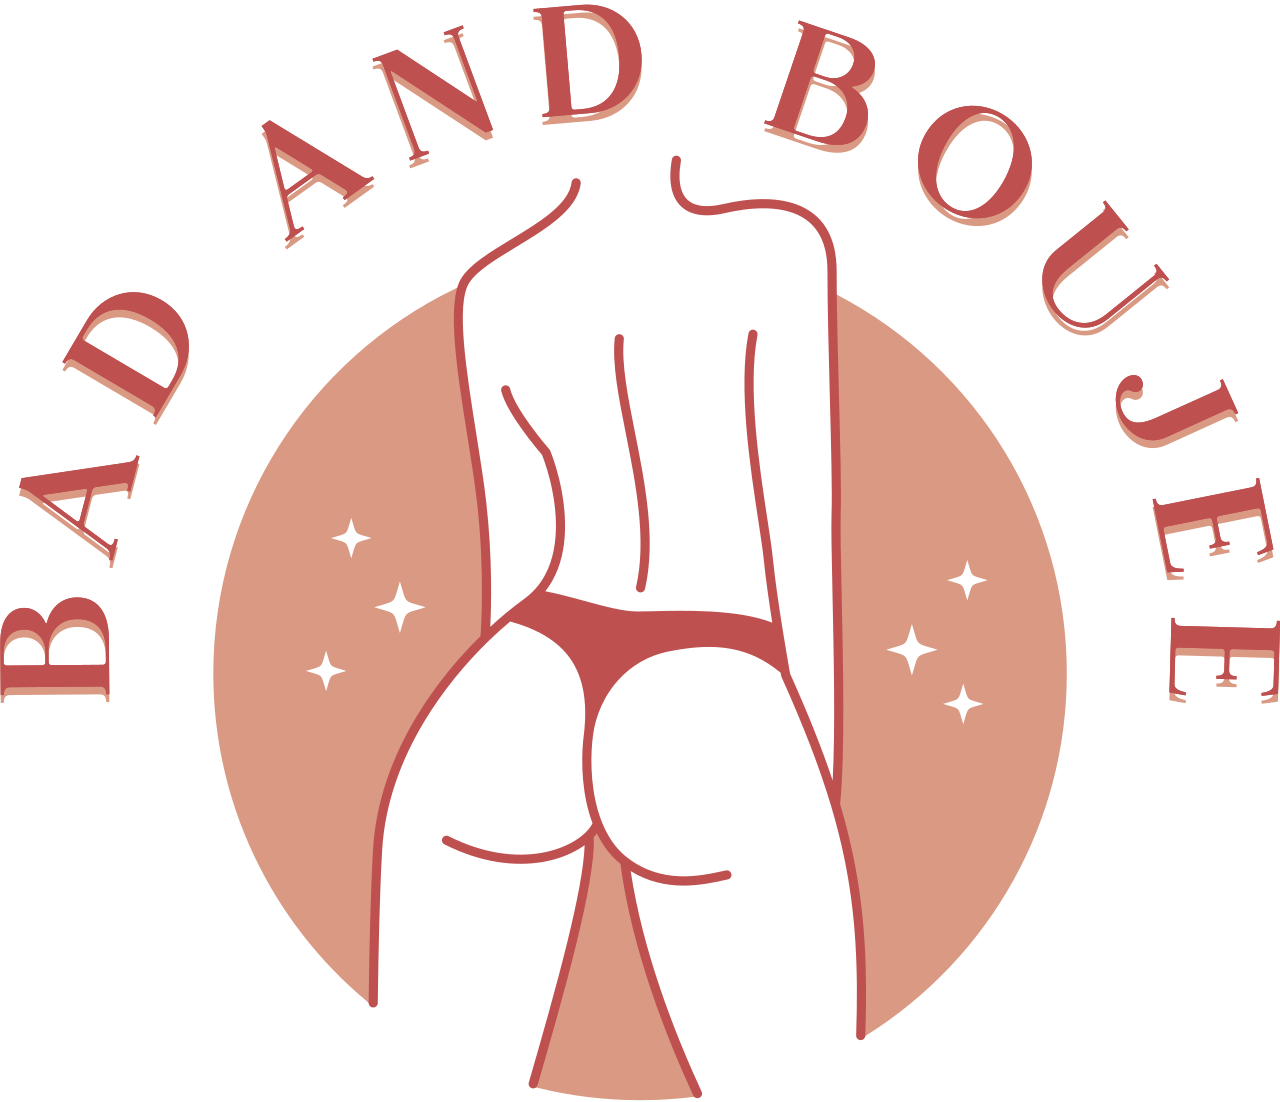 Bad and boujee's logo